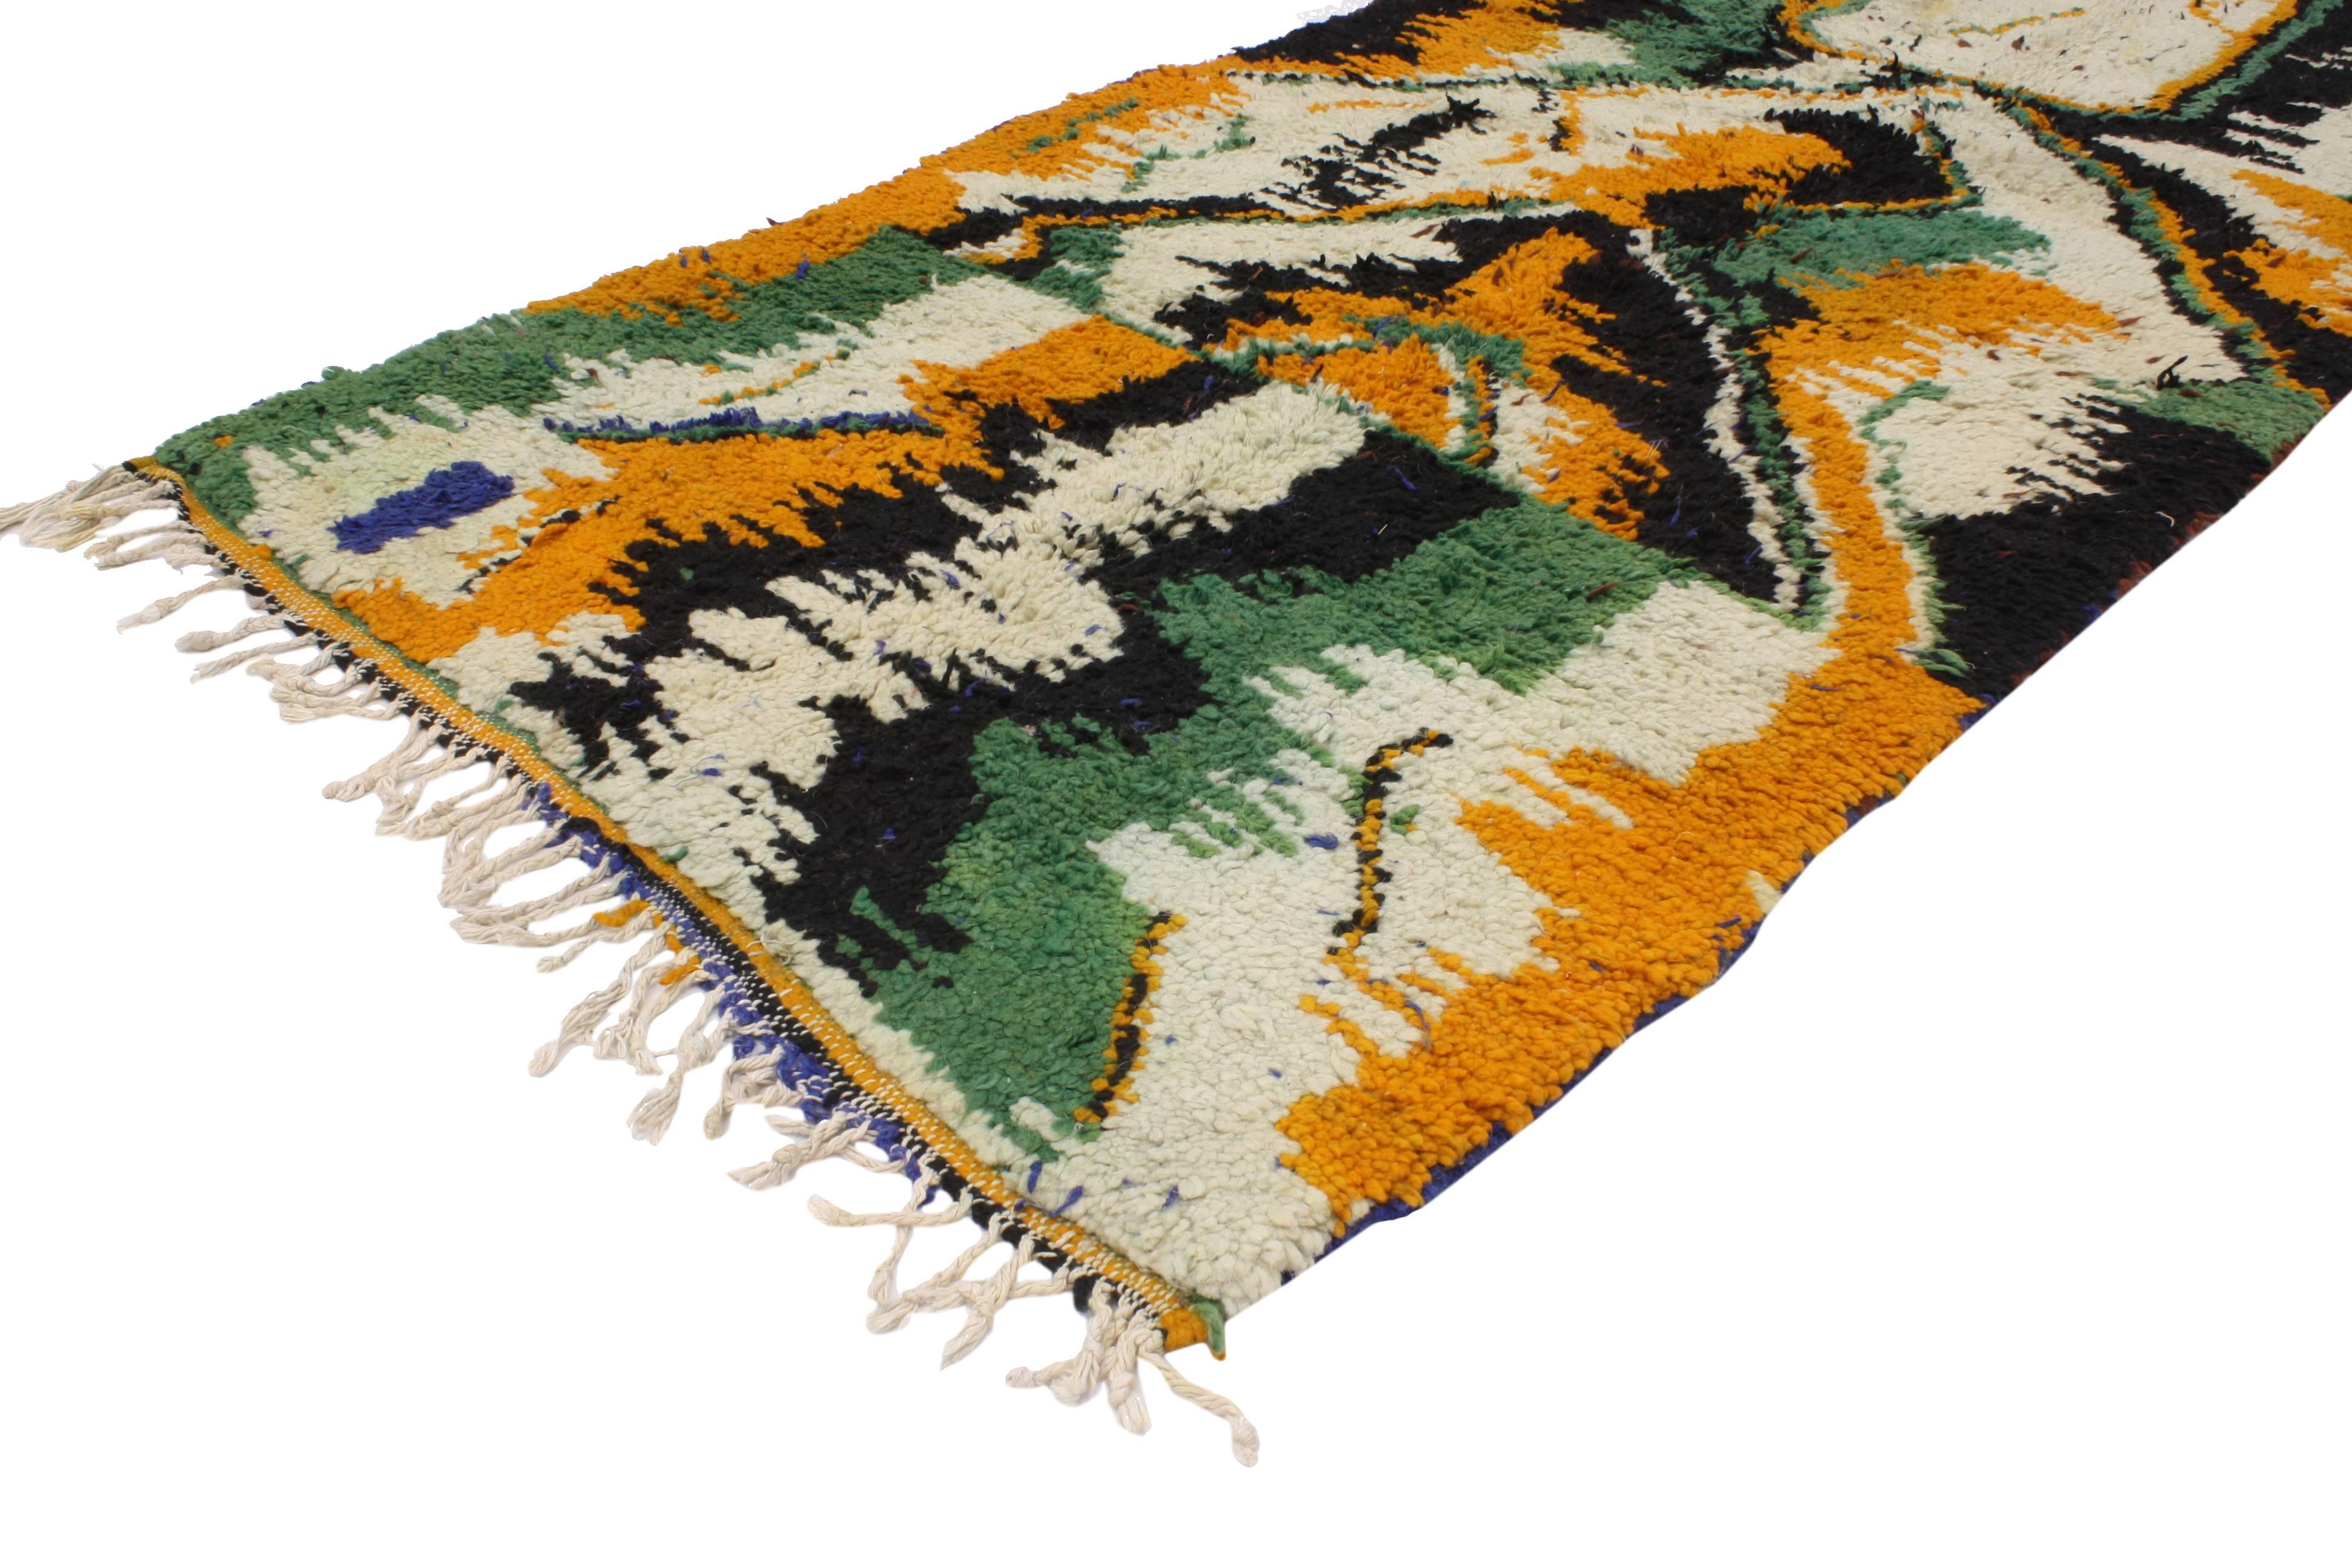 This hand-knotted wool vintage Berber Moroccan rug features an all-over contemporary abstract design. Rendered in green, orange, black and ivory-beige with a hint of blue and brown. With its contemporary and abstract design, this Berber Moroccan rug